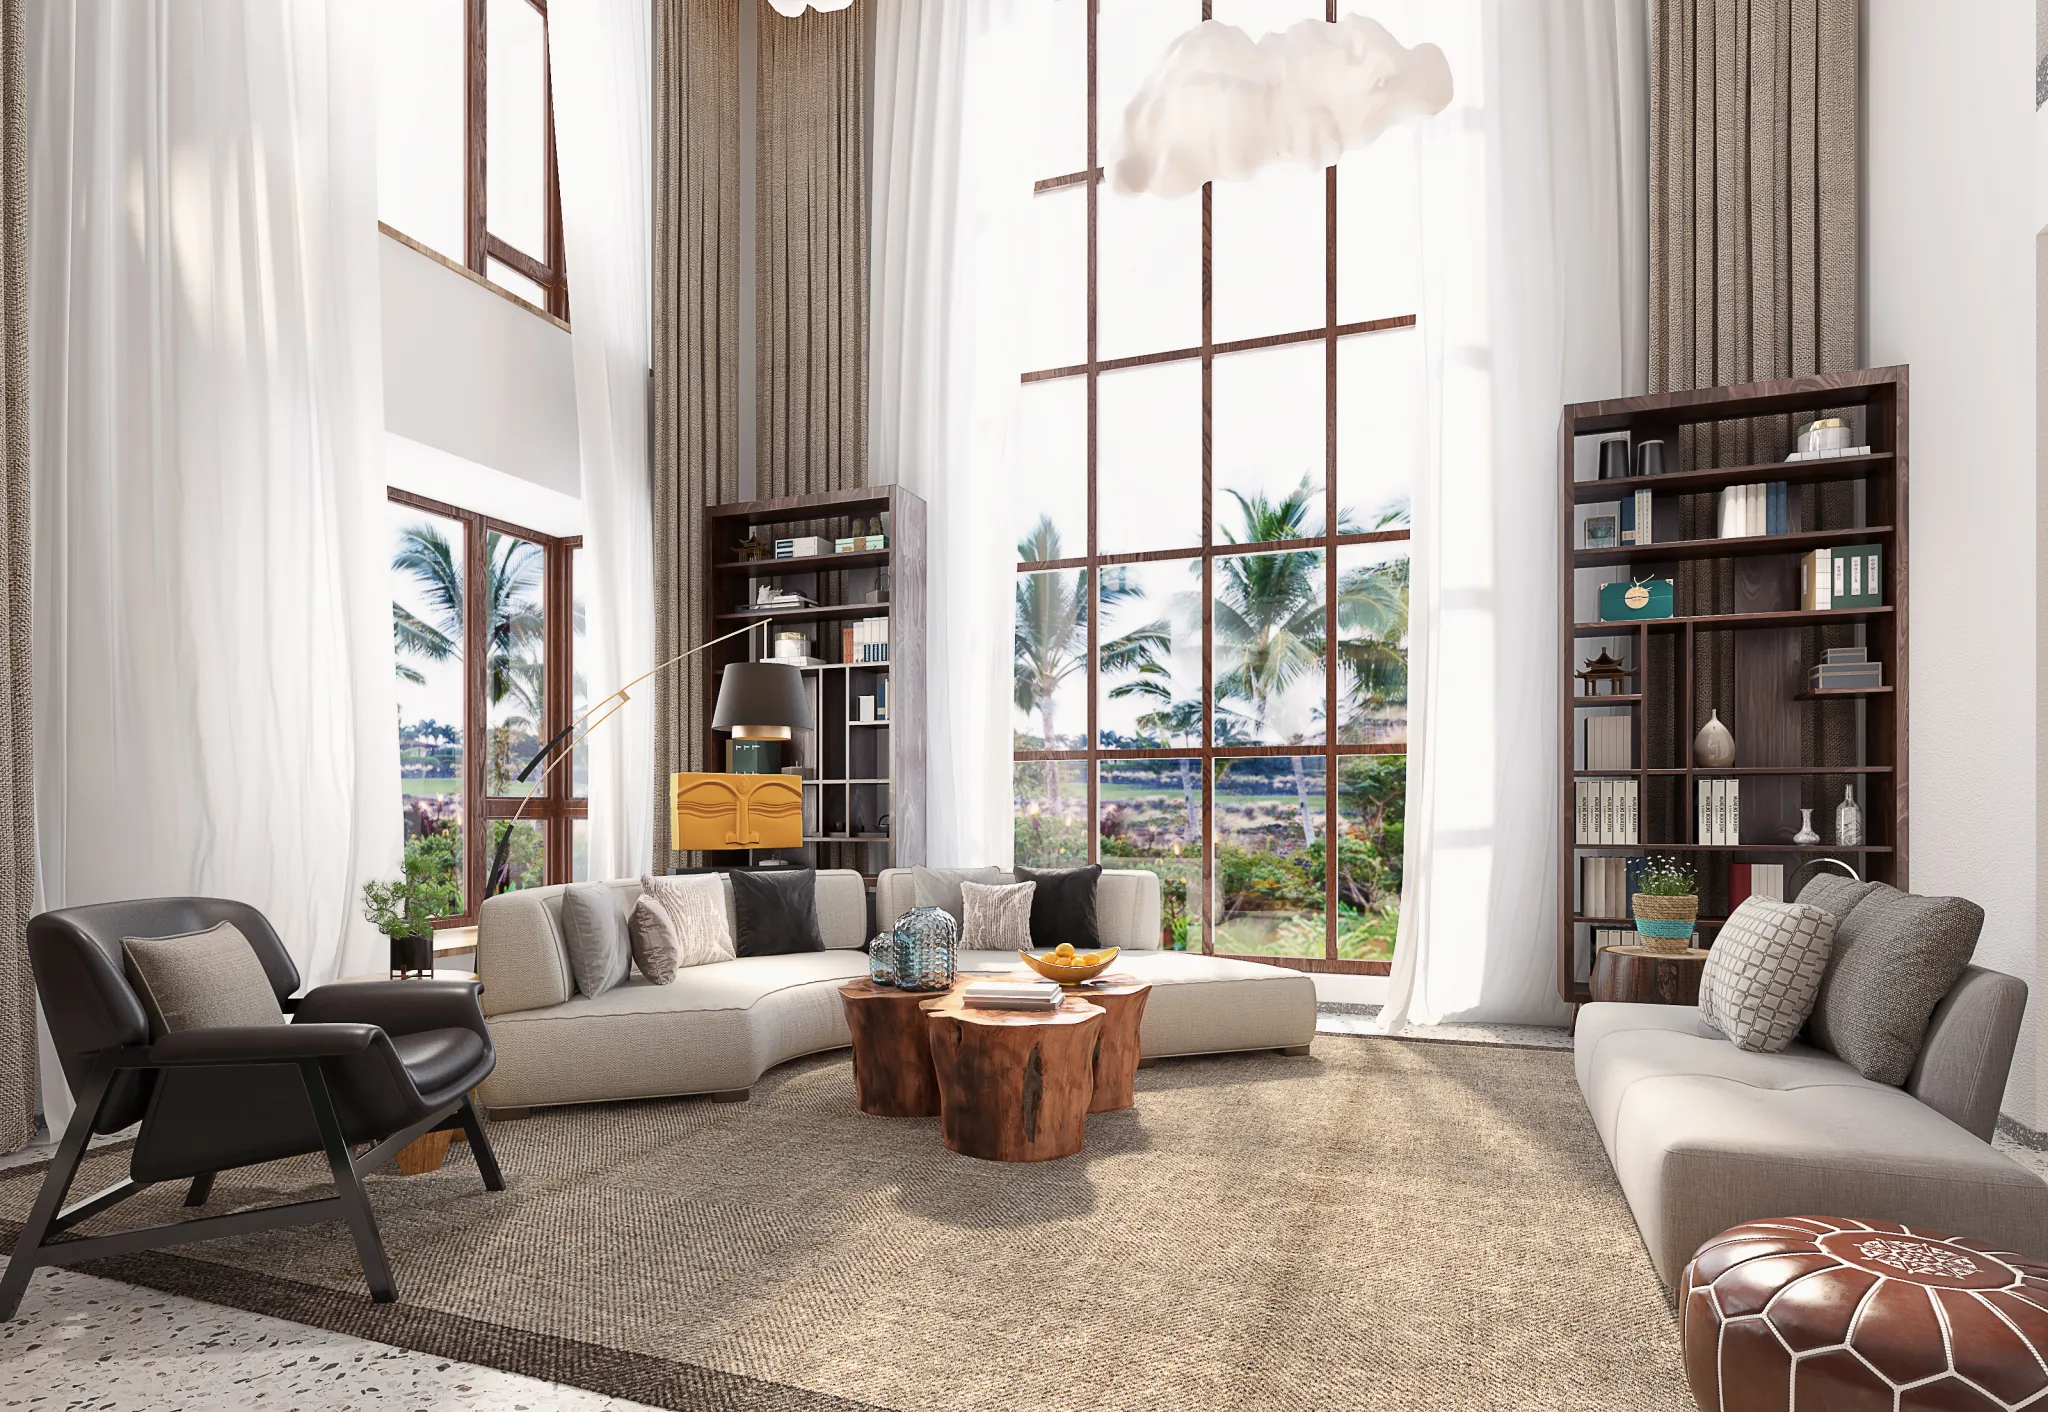 DESMOD INTERIOR 2021 (VRAY) – 4. LIVING ROOM – CHINESE – 134 (1)